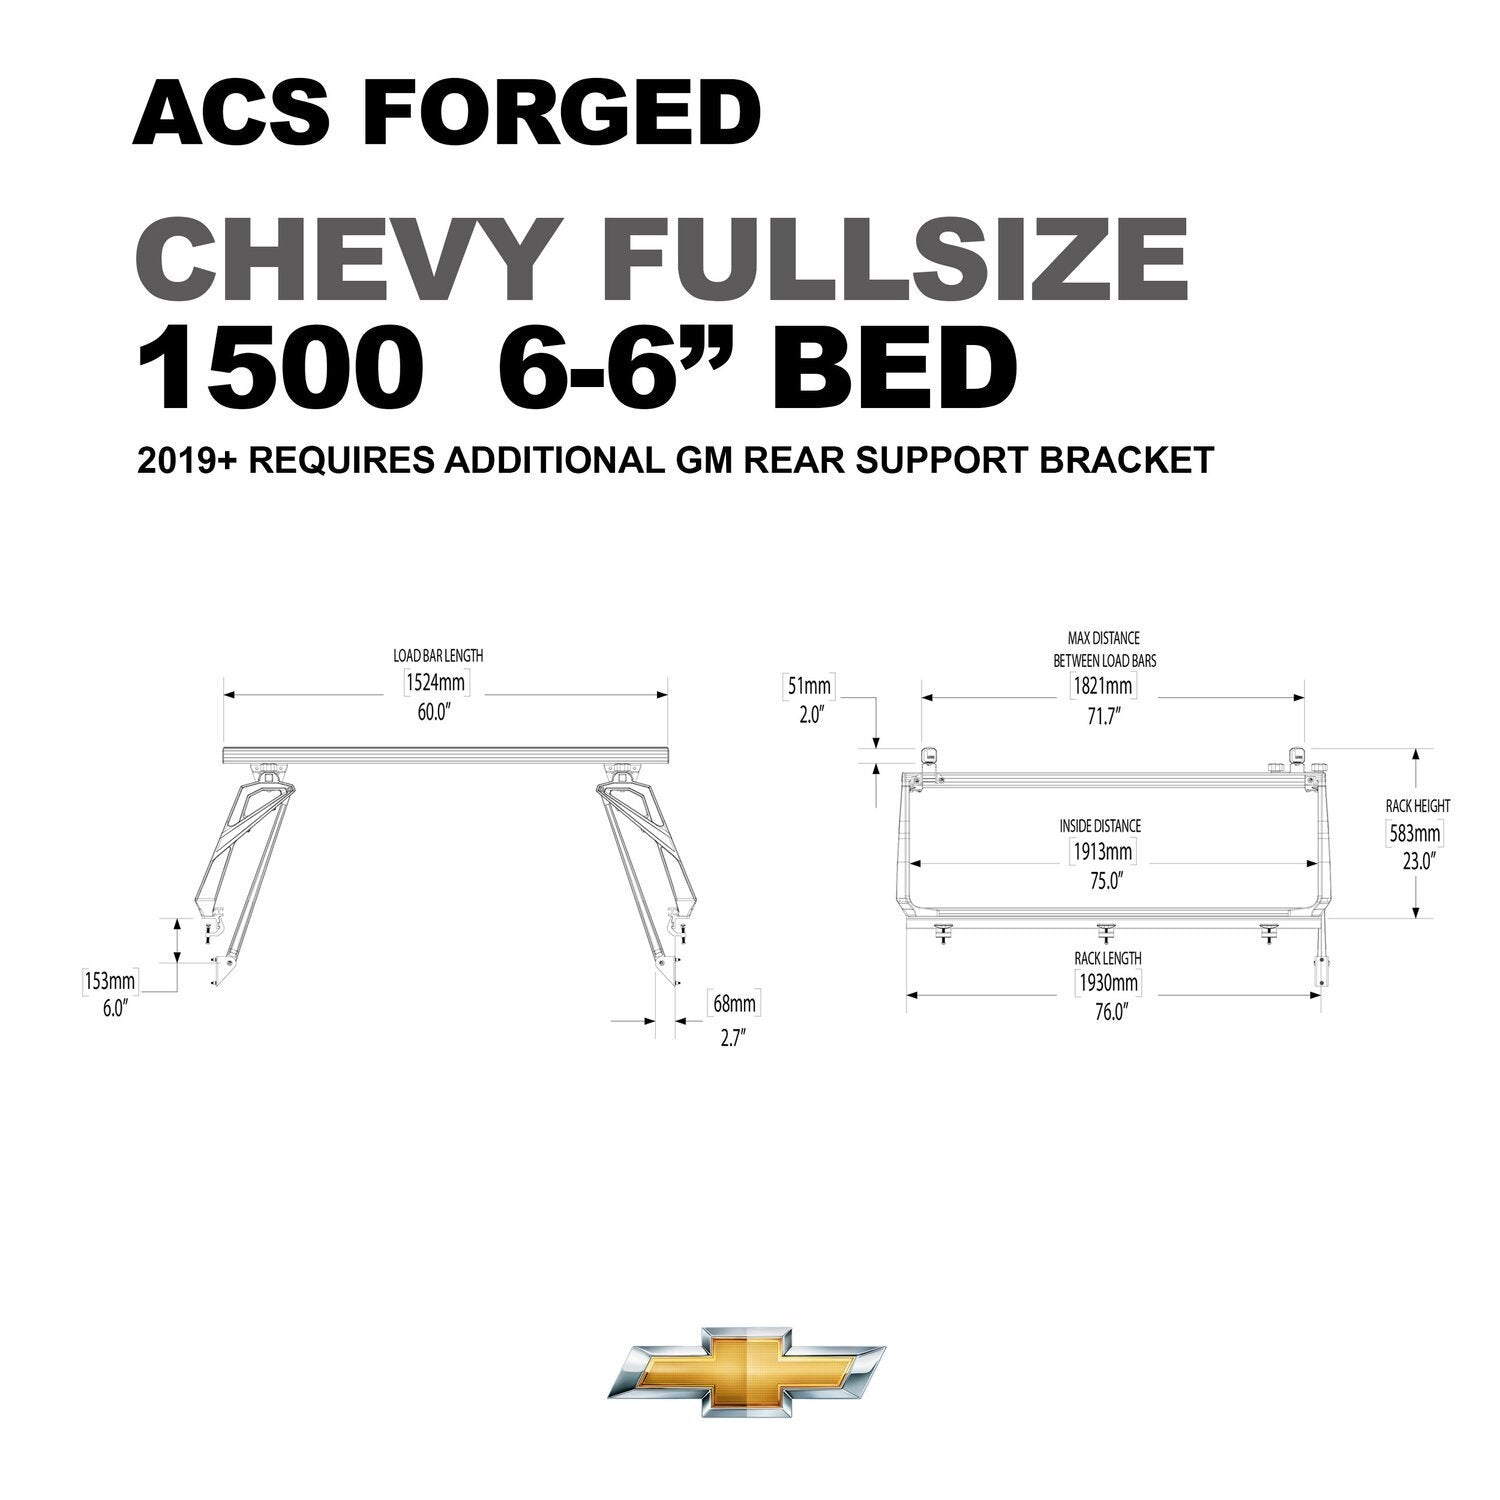 Active Cargo System - FORGED - Chevrolet